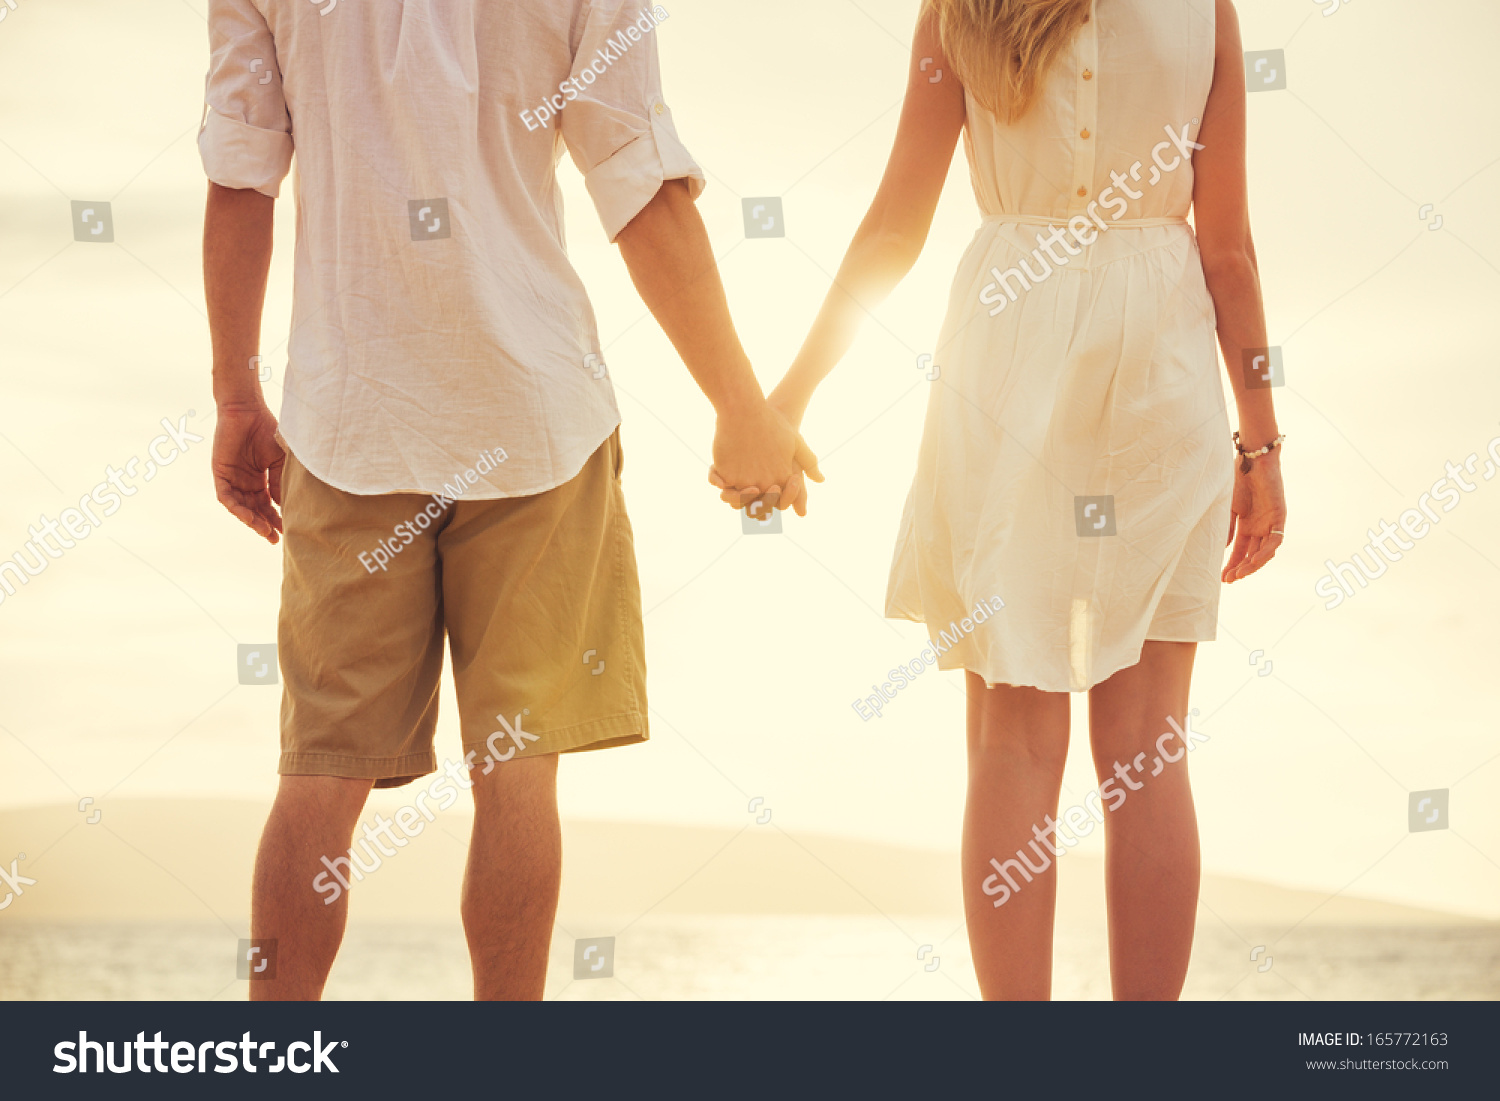 Young couple in love, Attractive man and woman enjoying romantic evening on the beach, Holding hands watching the sunset #165772163